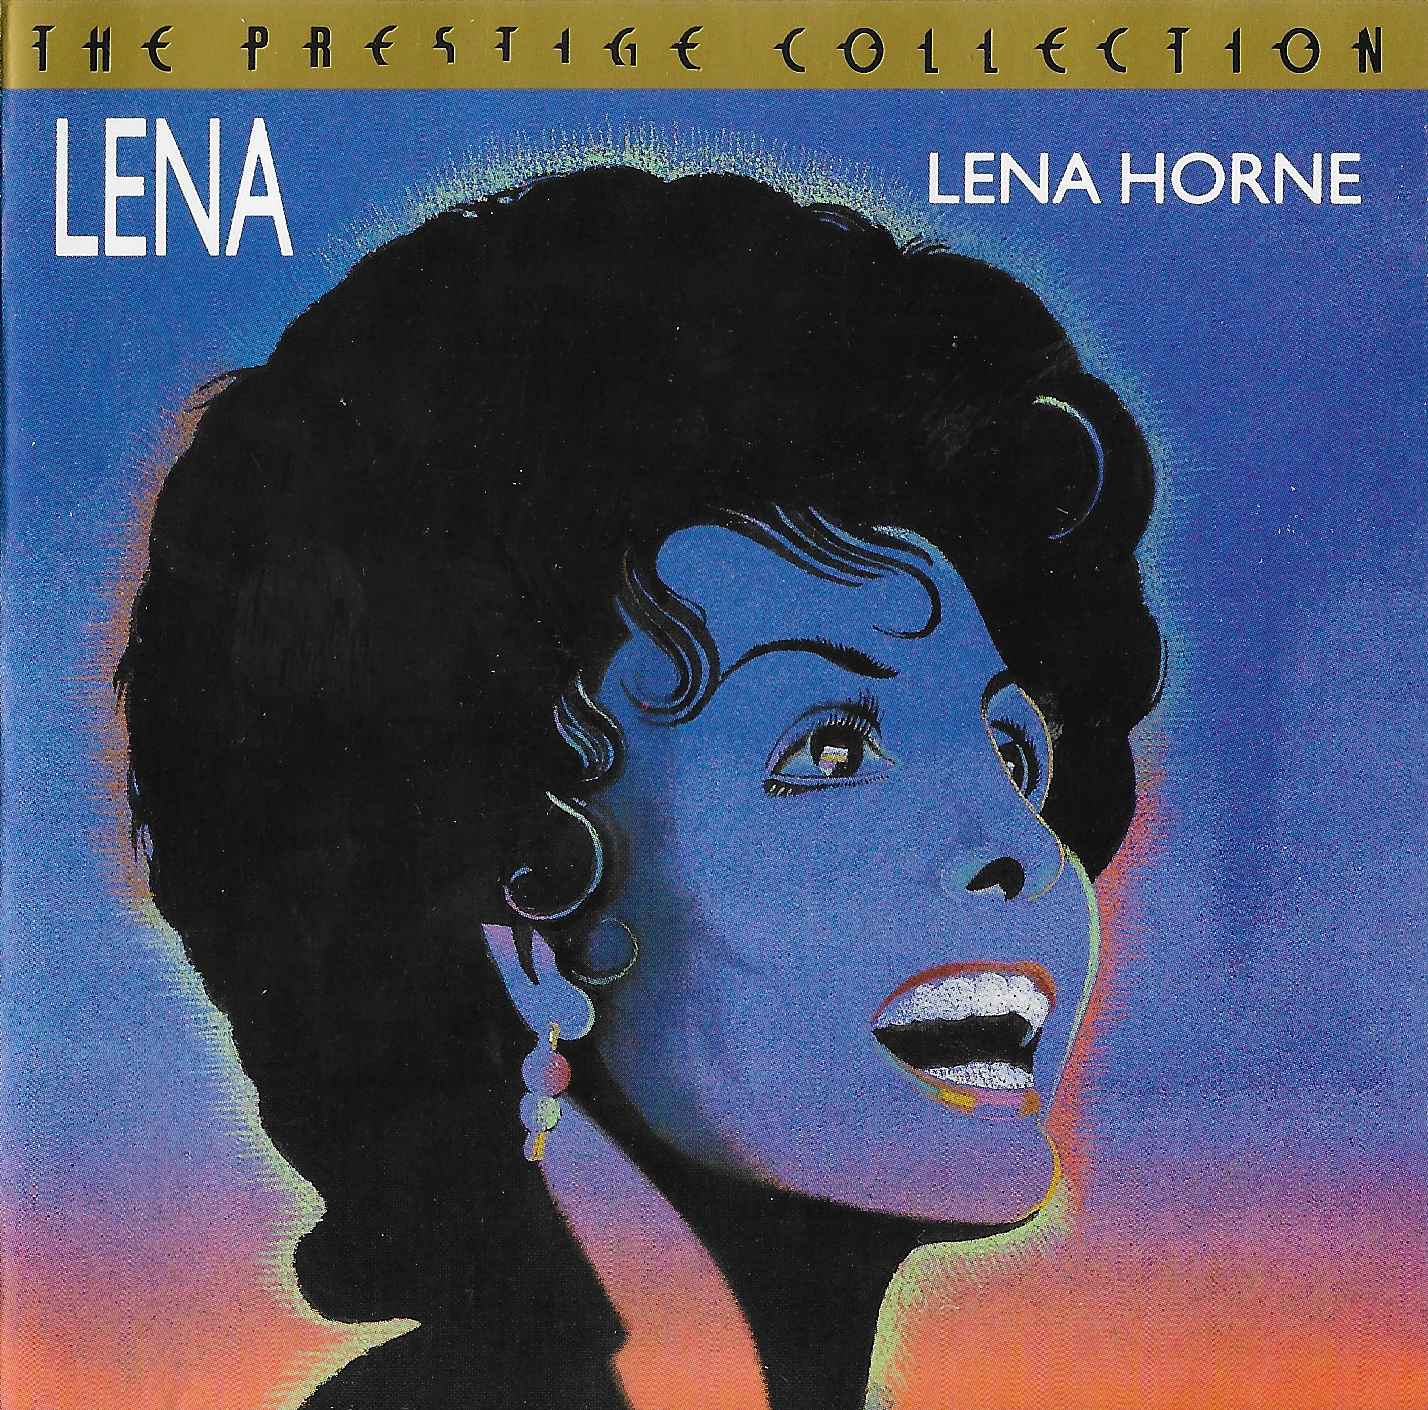 Picture of Lena by artist Lena Horne from the BBC cds - Records and Tapes library